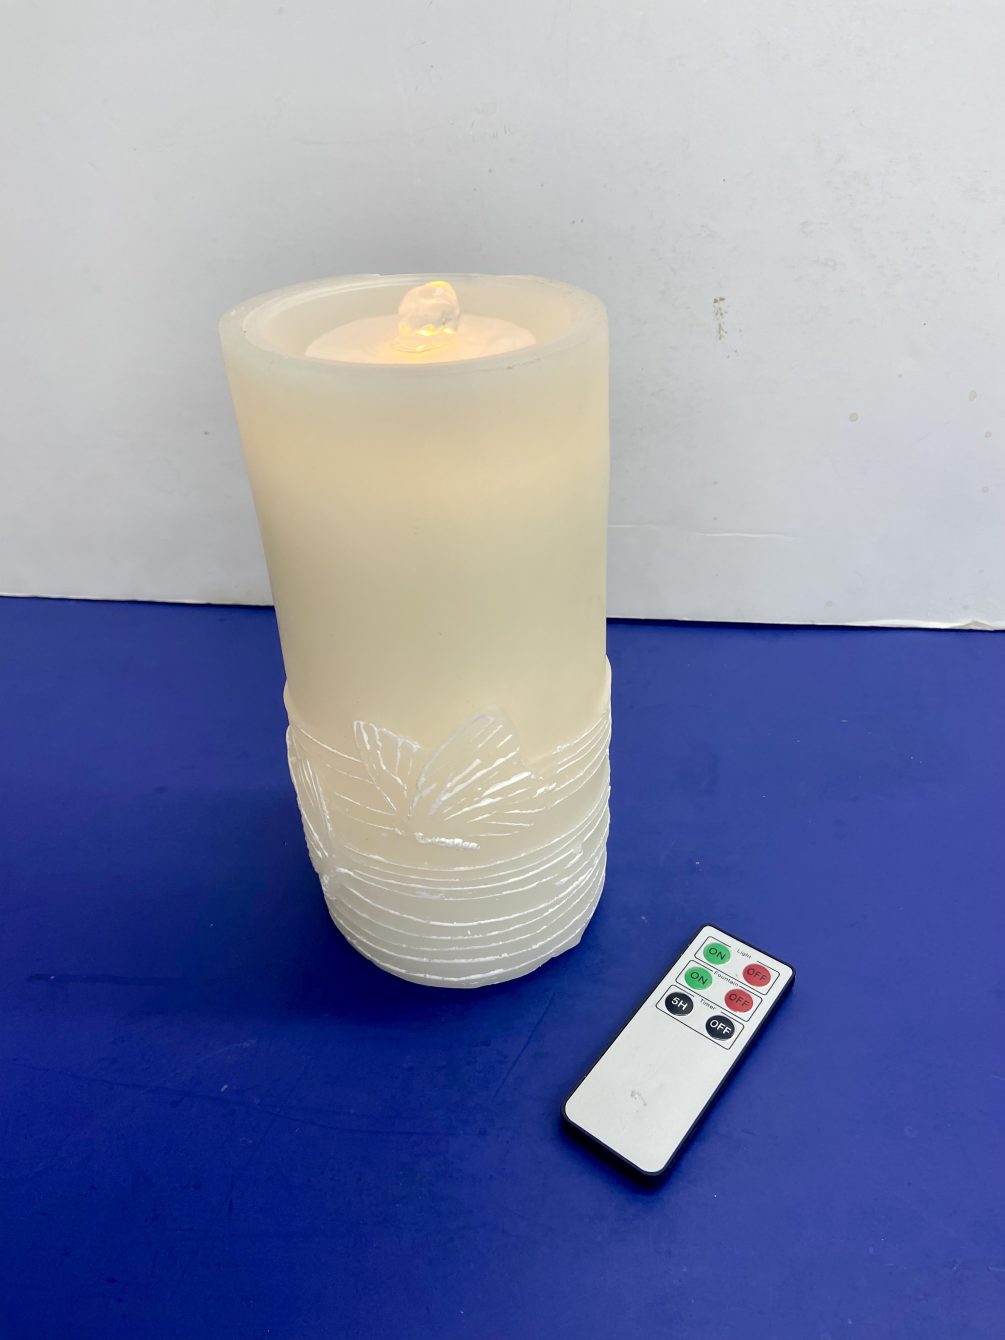 Led wax battery candle fountain with butterflies around the base and water